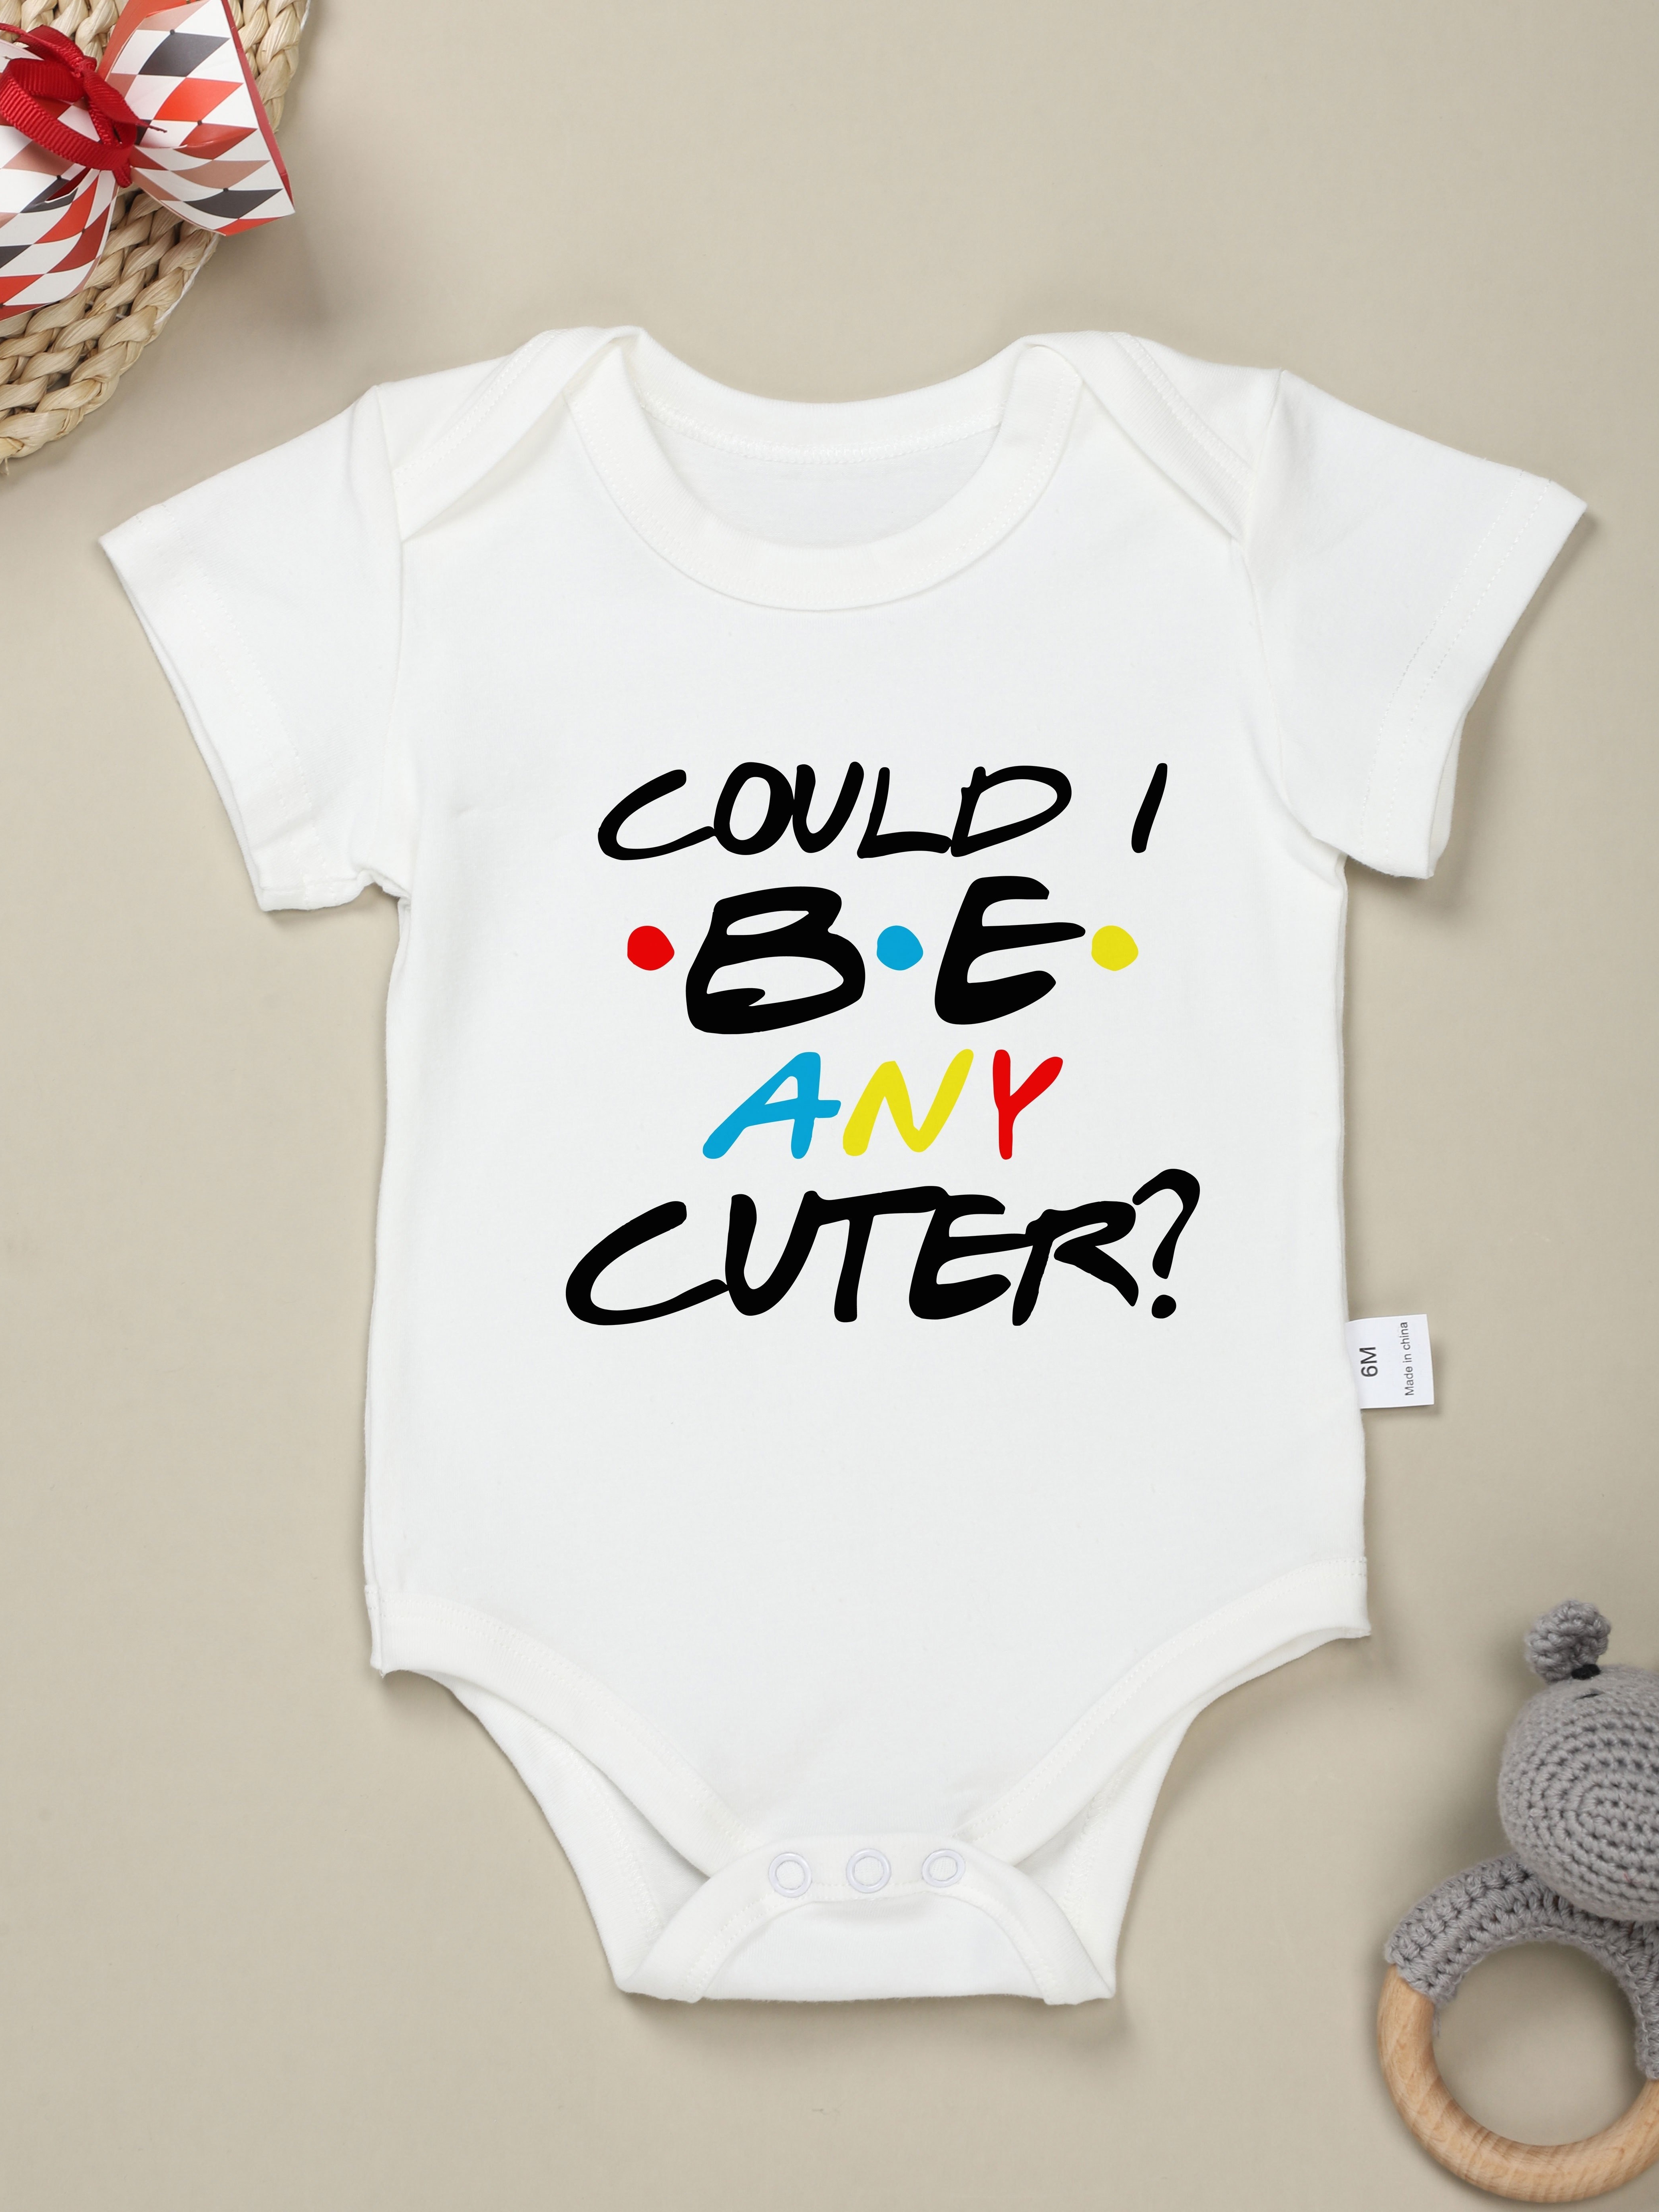 HANGOVER Funny BABY CARRIER Onesie 6 9 12 18 24 2T Creeper Outfit